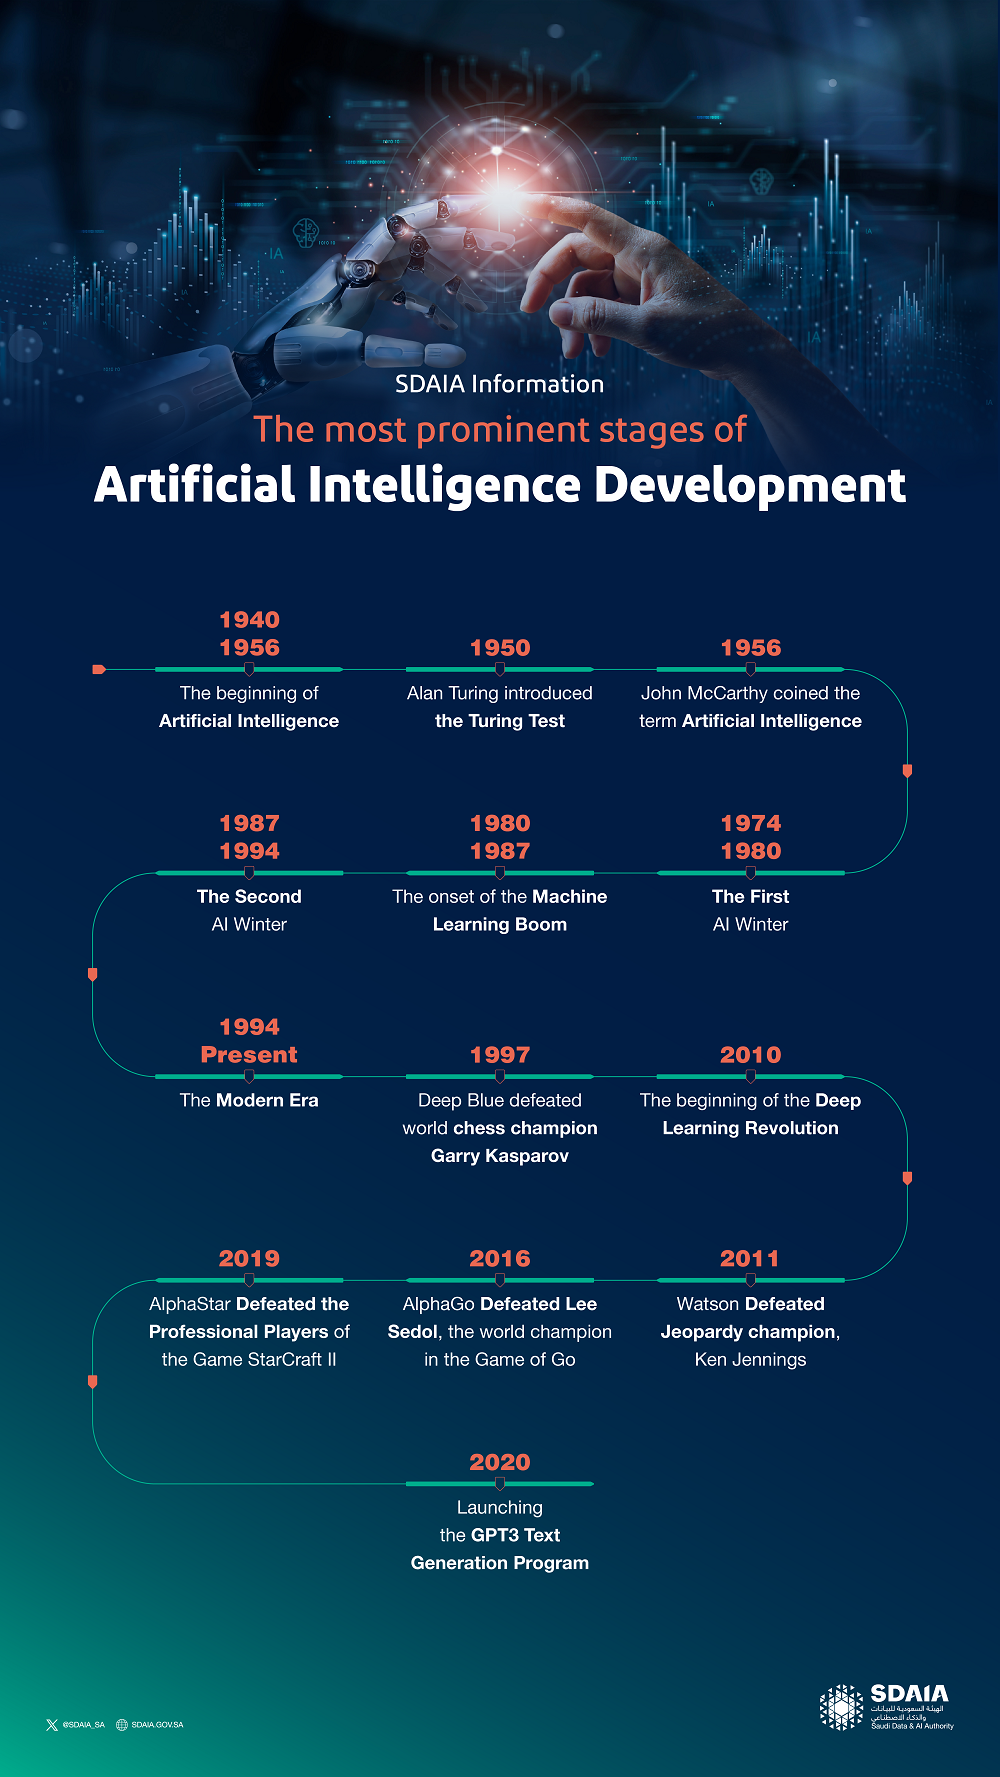 The most prominent stages of the development of AI